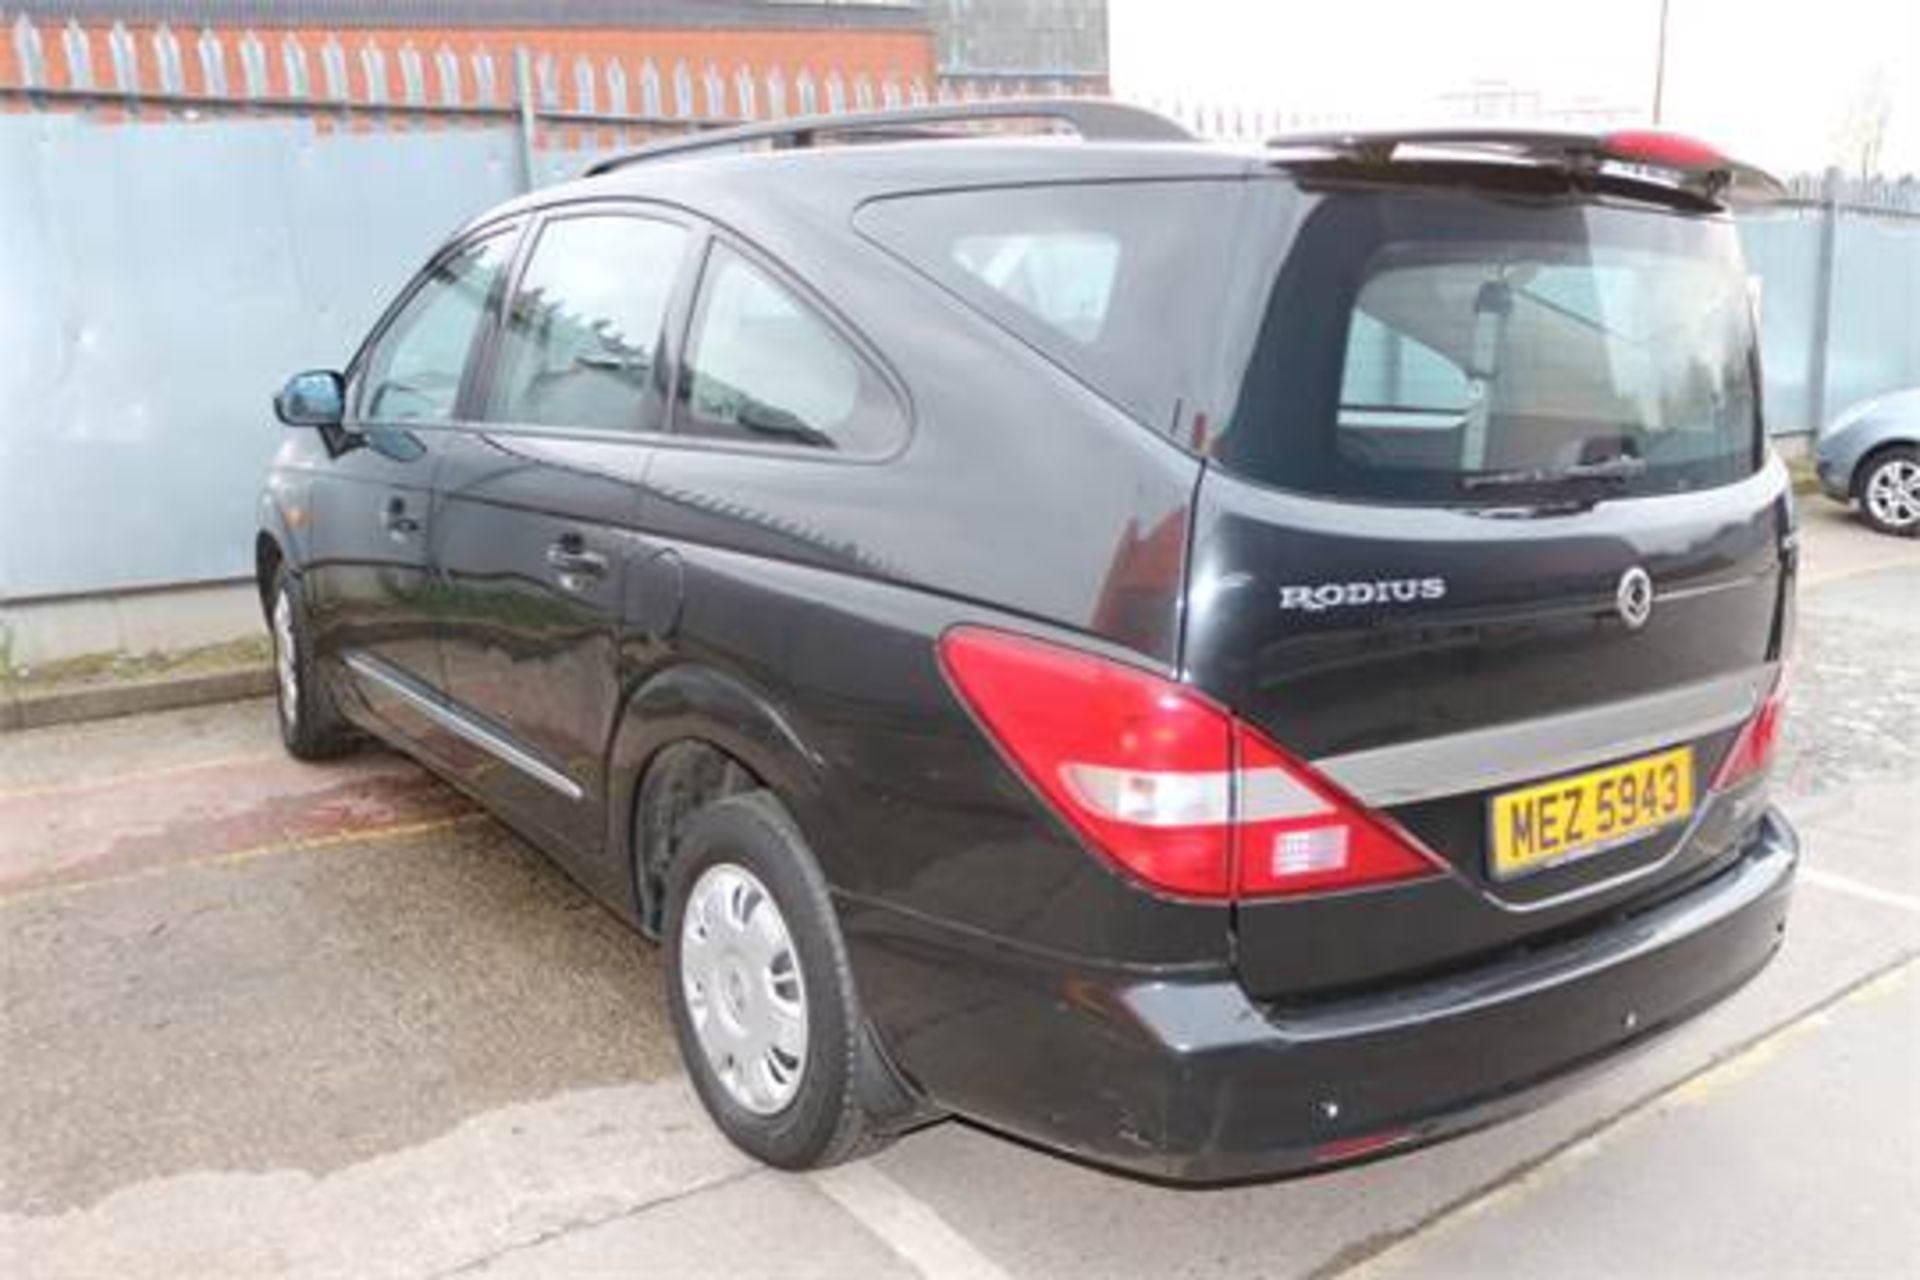 SSANGYONG, RODIUS 270, MEZ 5943, 2-7 LTR, DIESEL, MANUAL, APRIL 2007, 5 DOOR MPV, CURRENT RECORDED - Image 5 of 11